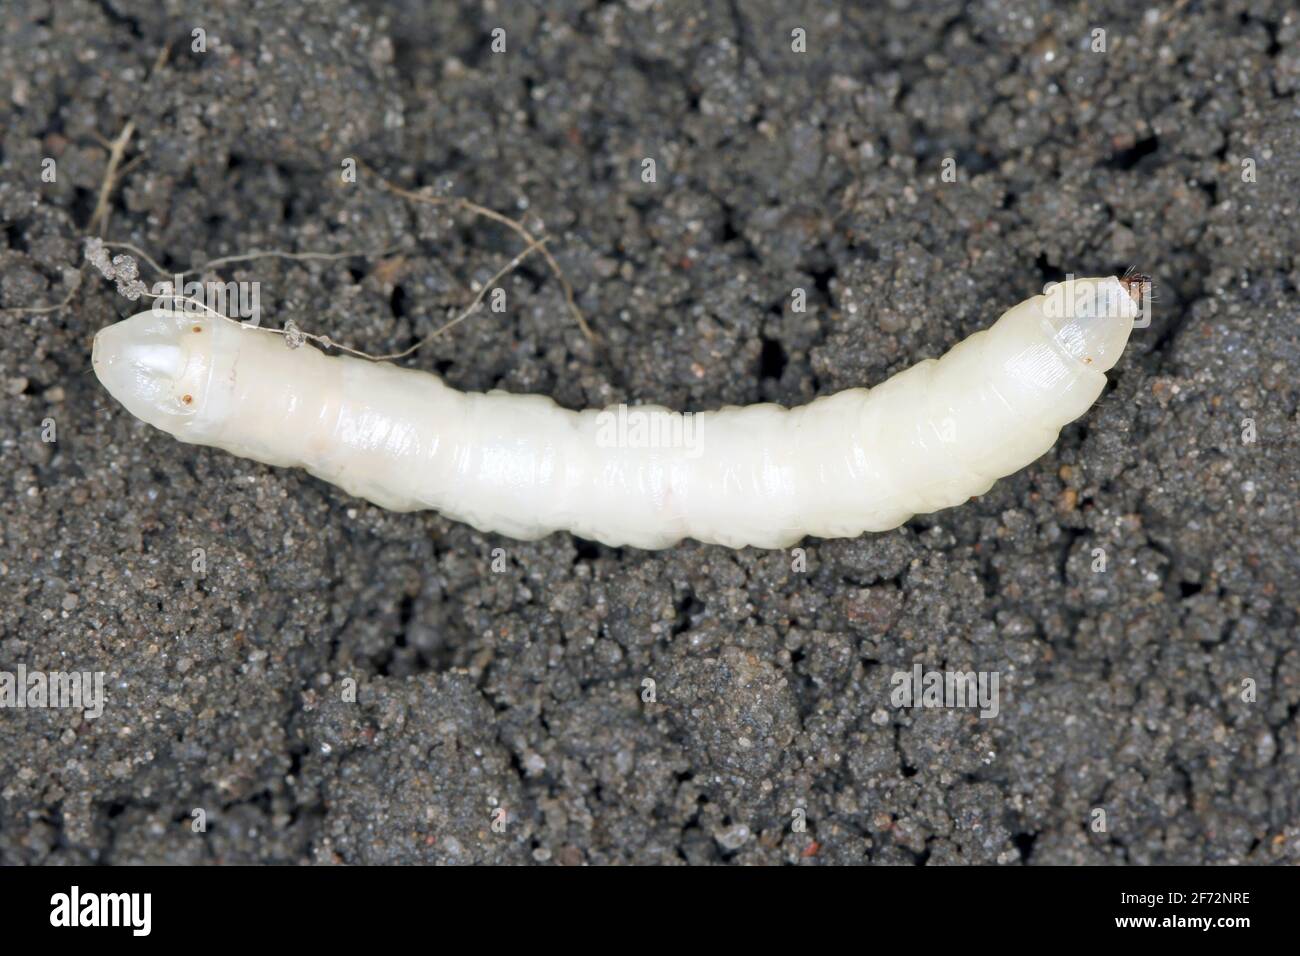 Larva on soil of Crane fly is a common name referring to any member of the insect family Tipulidae. It is significant pest in soil of many crops. Stock Photo